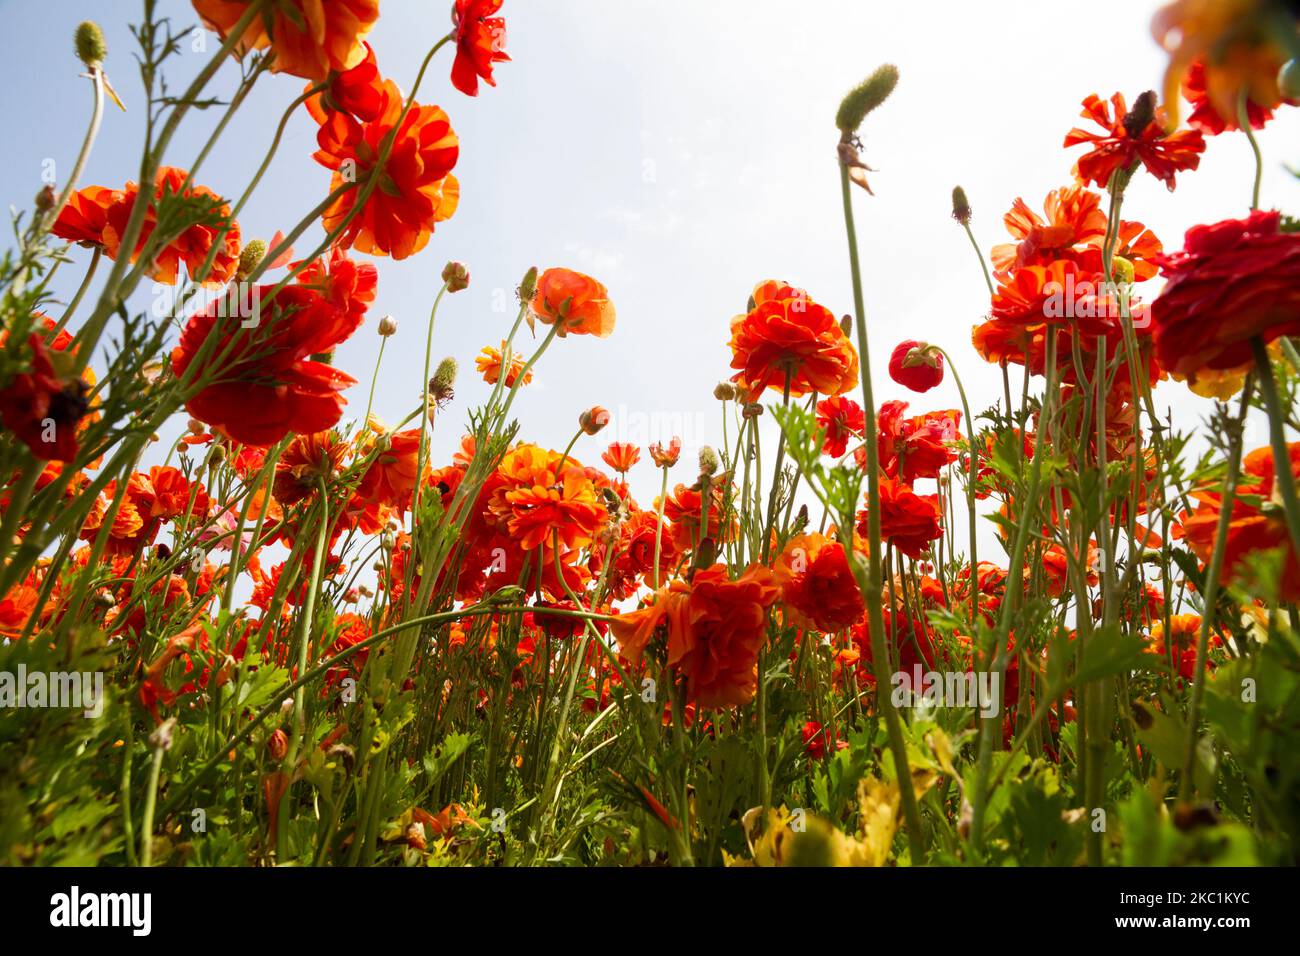 Looking up at blossoming orange buttercup flowers in a field in Southern Israel, in front of cloudy blue skies Stock Photo